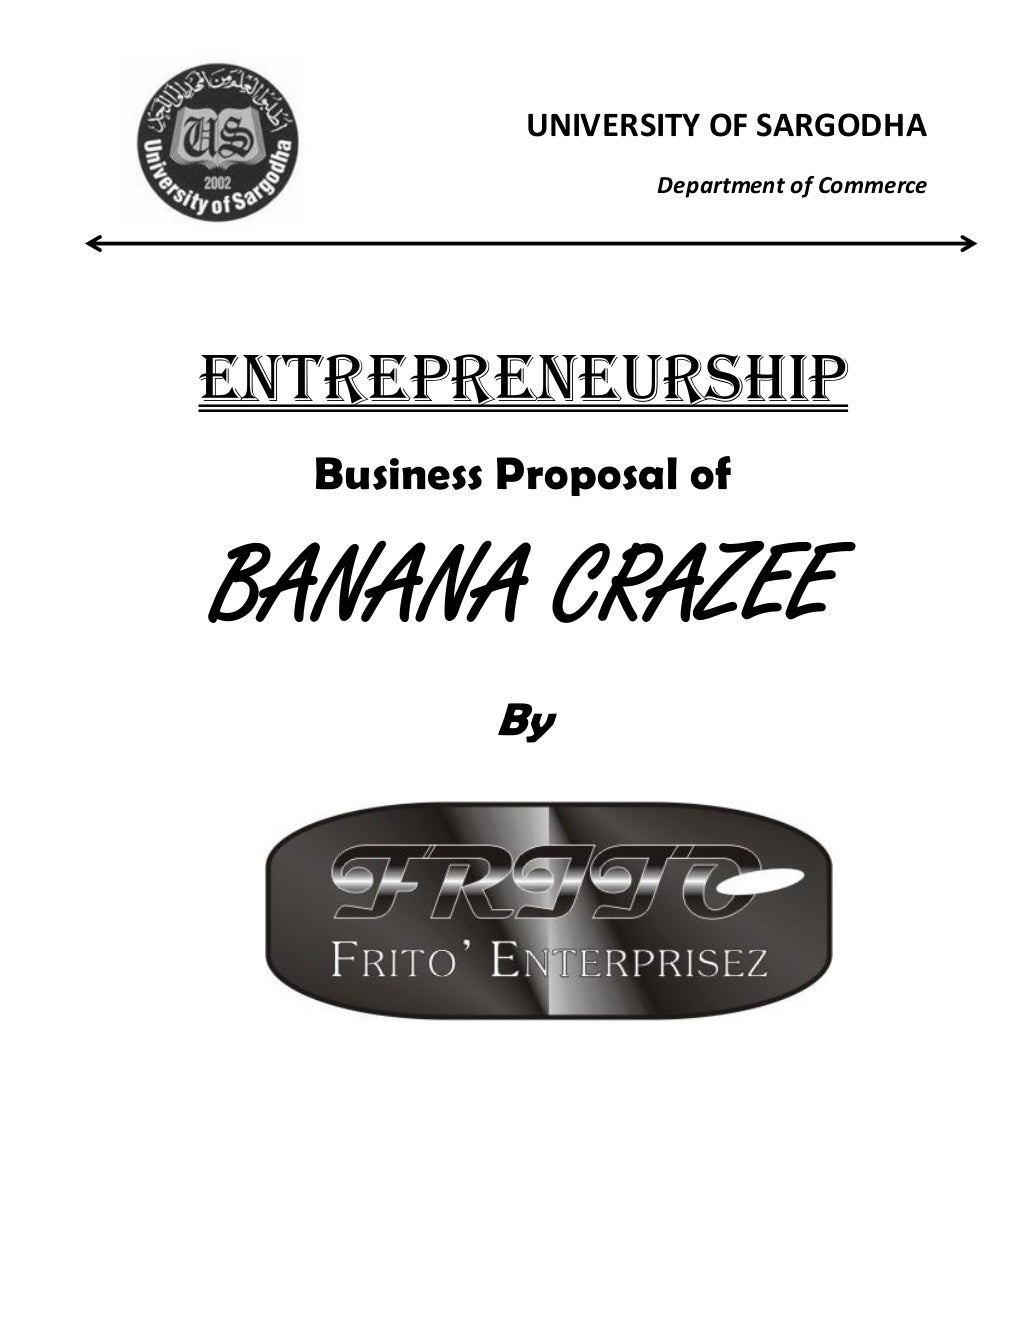 banana chips business plan introduction